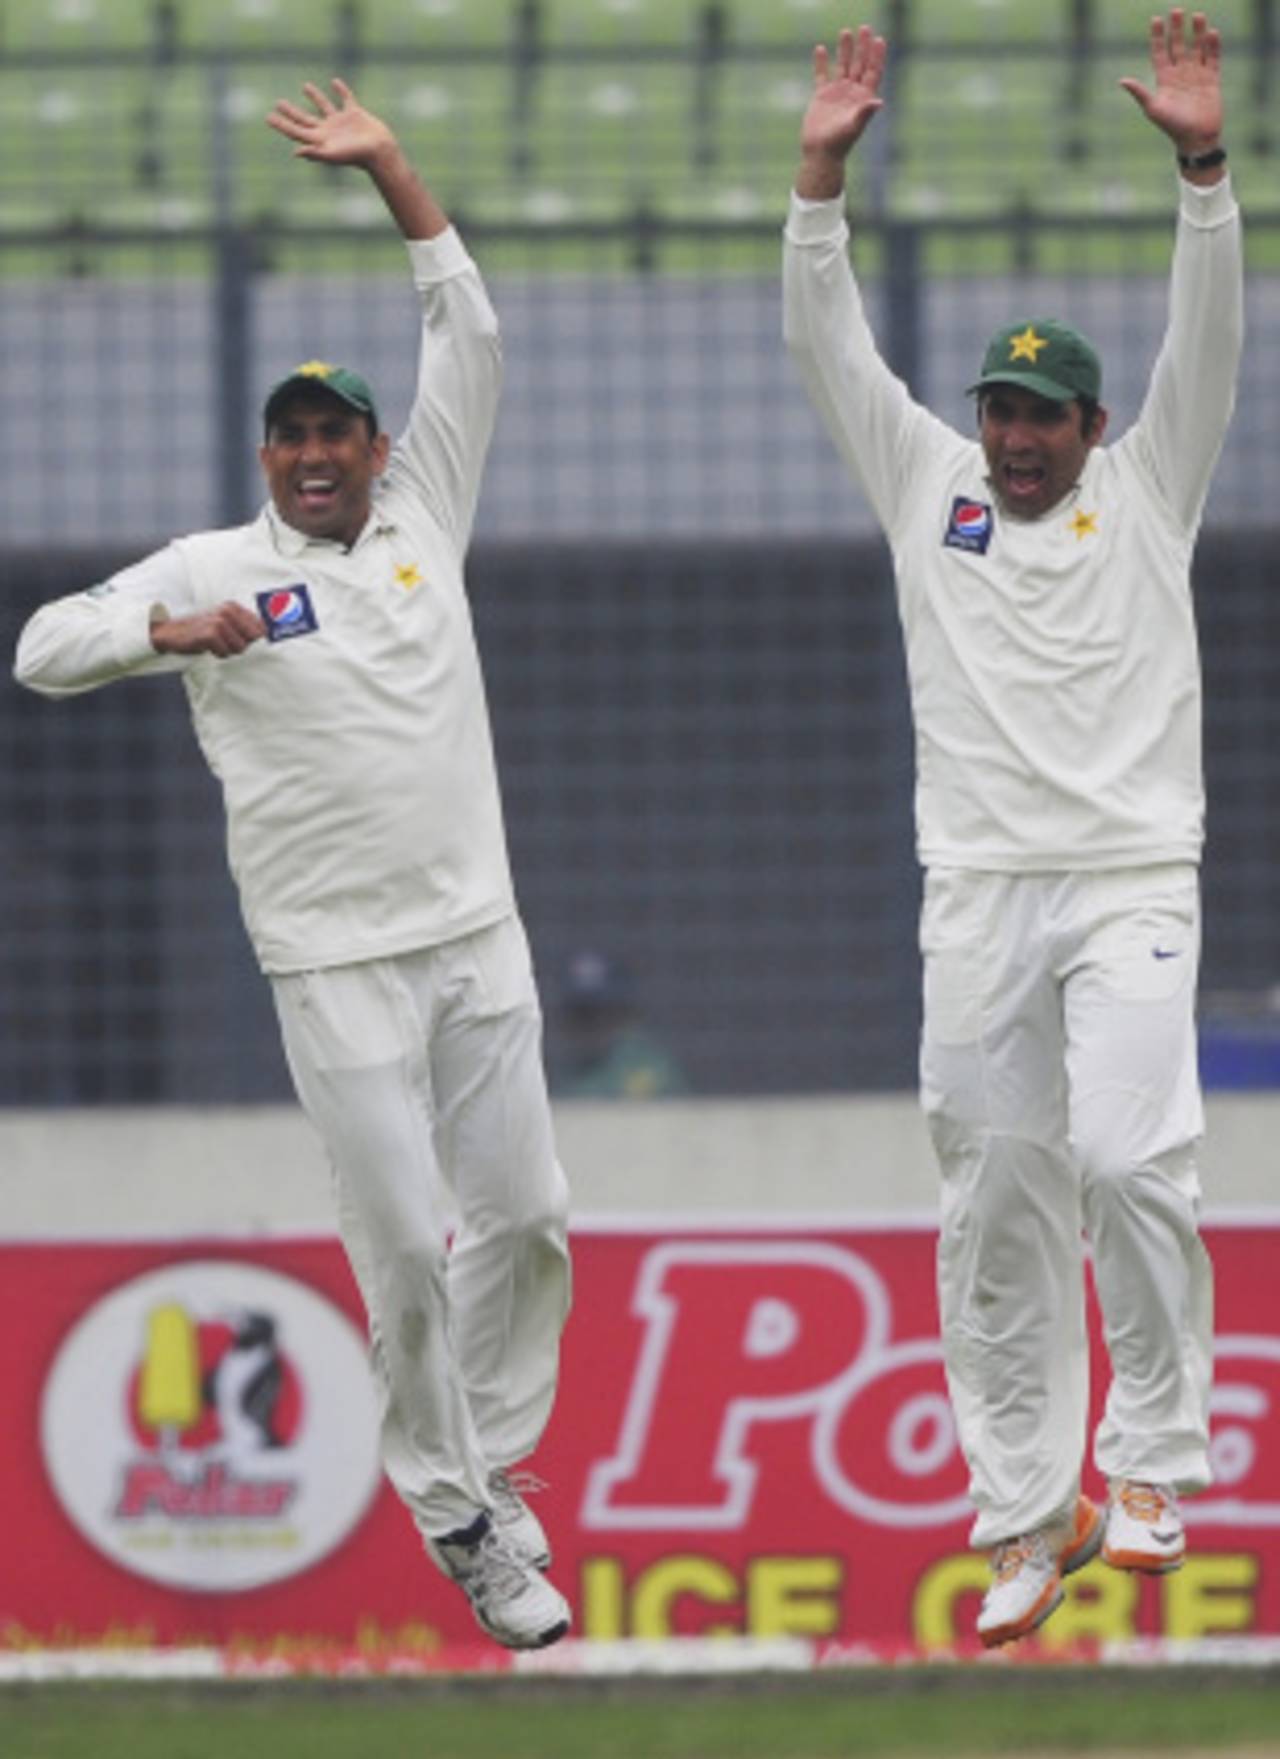 Younis Khan and Misbah-ul-Haq are delighted after the fall of Nasir Hossain, Bangladesh v Pakistan, 2nd Test, Mirpur, 1st day, December 17, 2011 